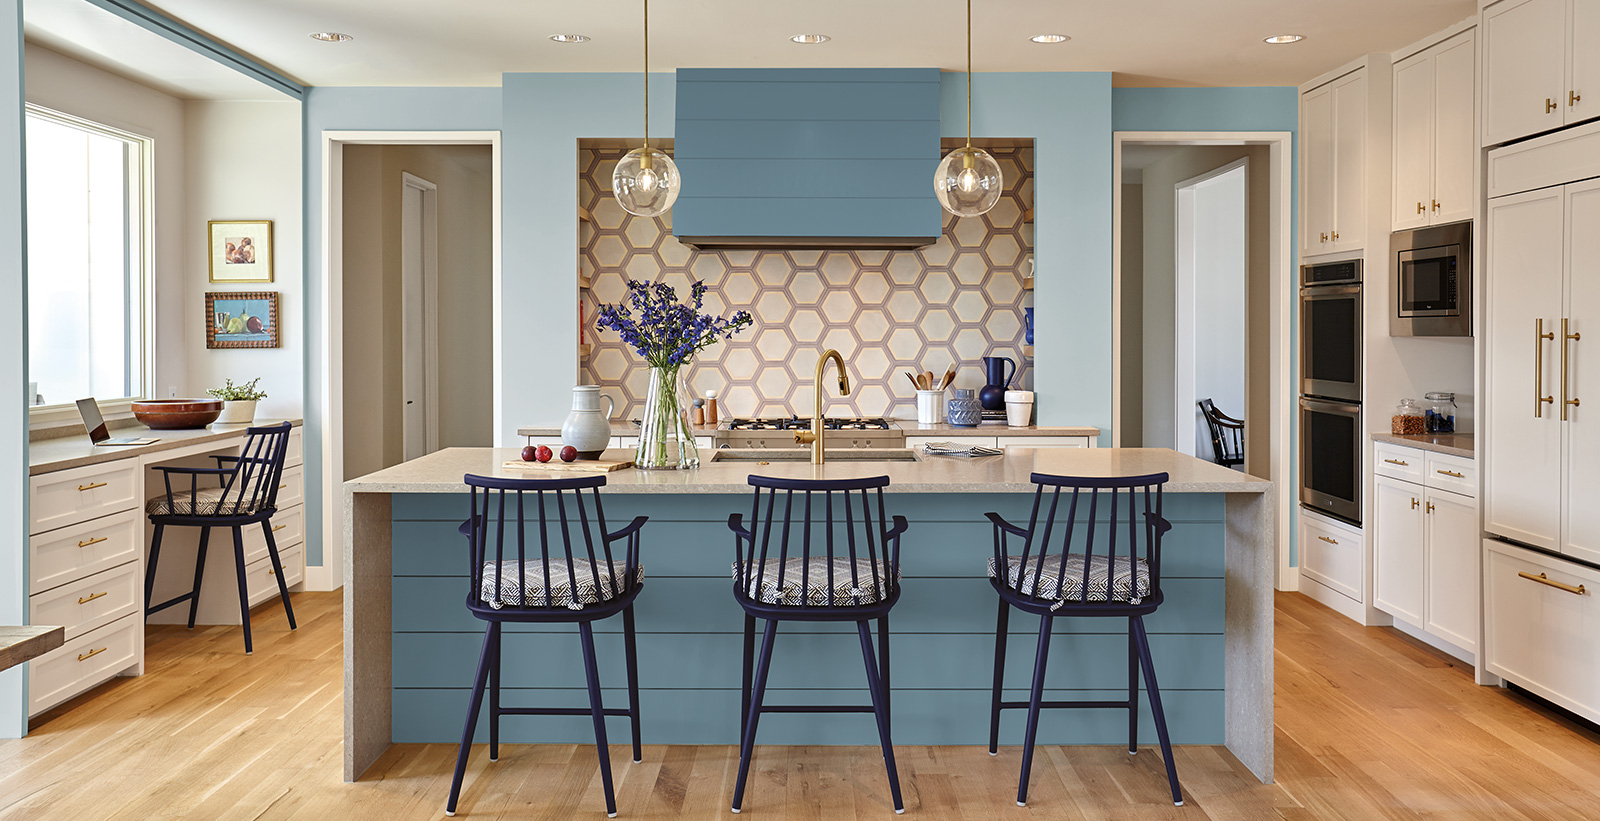  Kitchen Colors That Stand the Test of Time